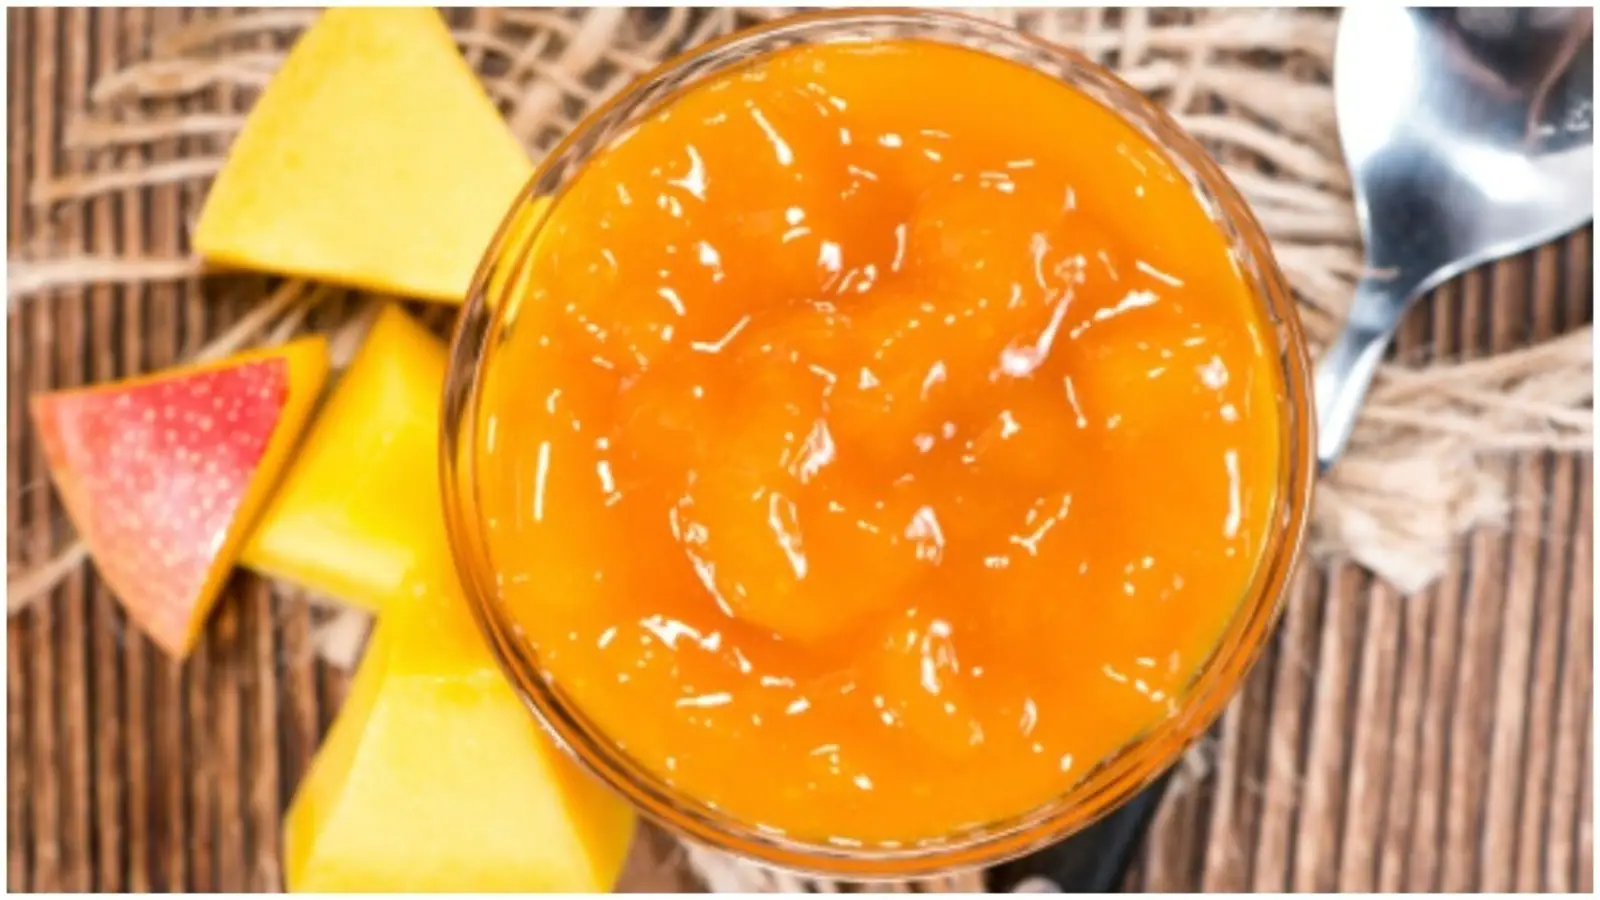 Make breakfast more exciting with mango jam. Recipe inside